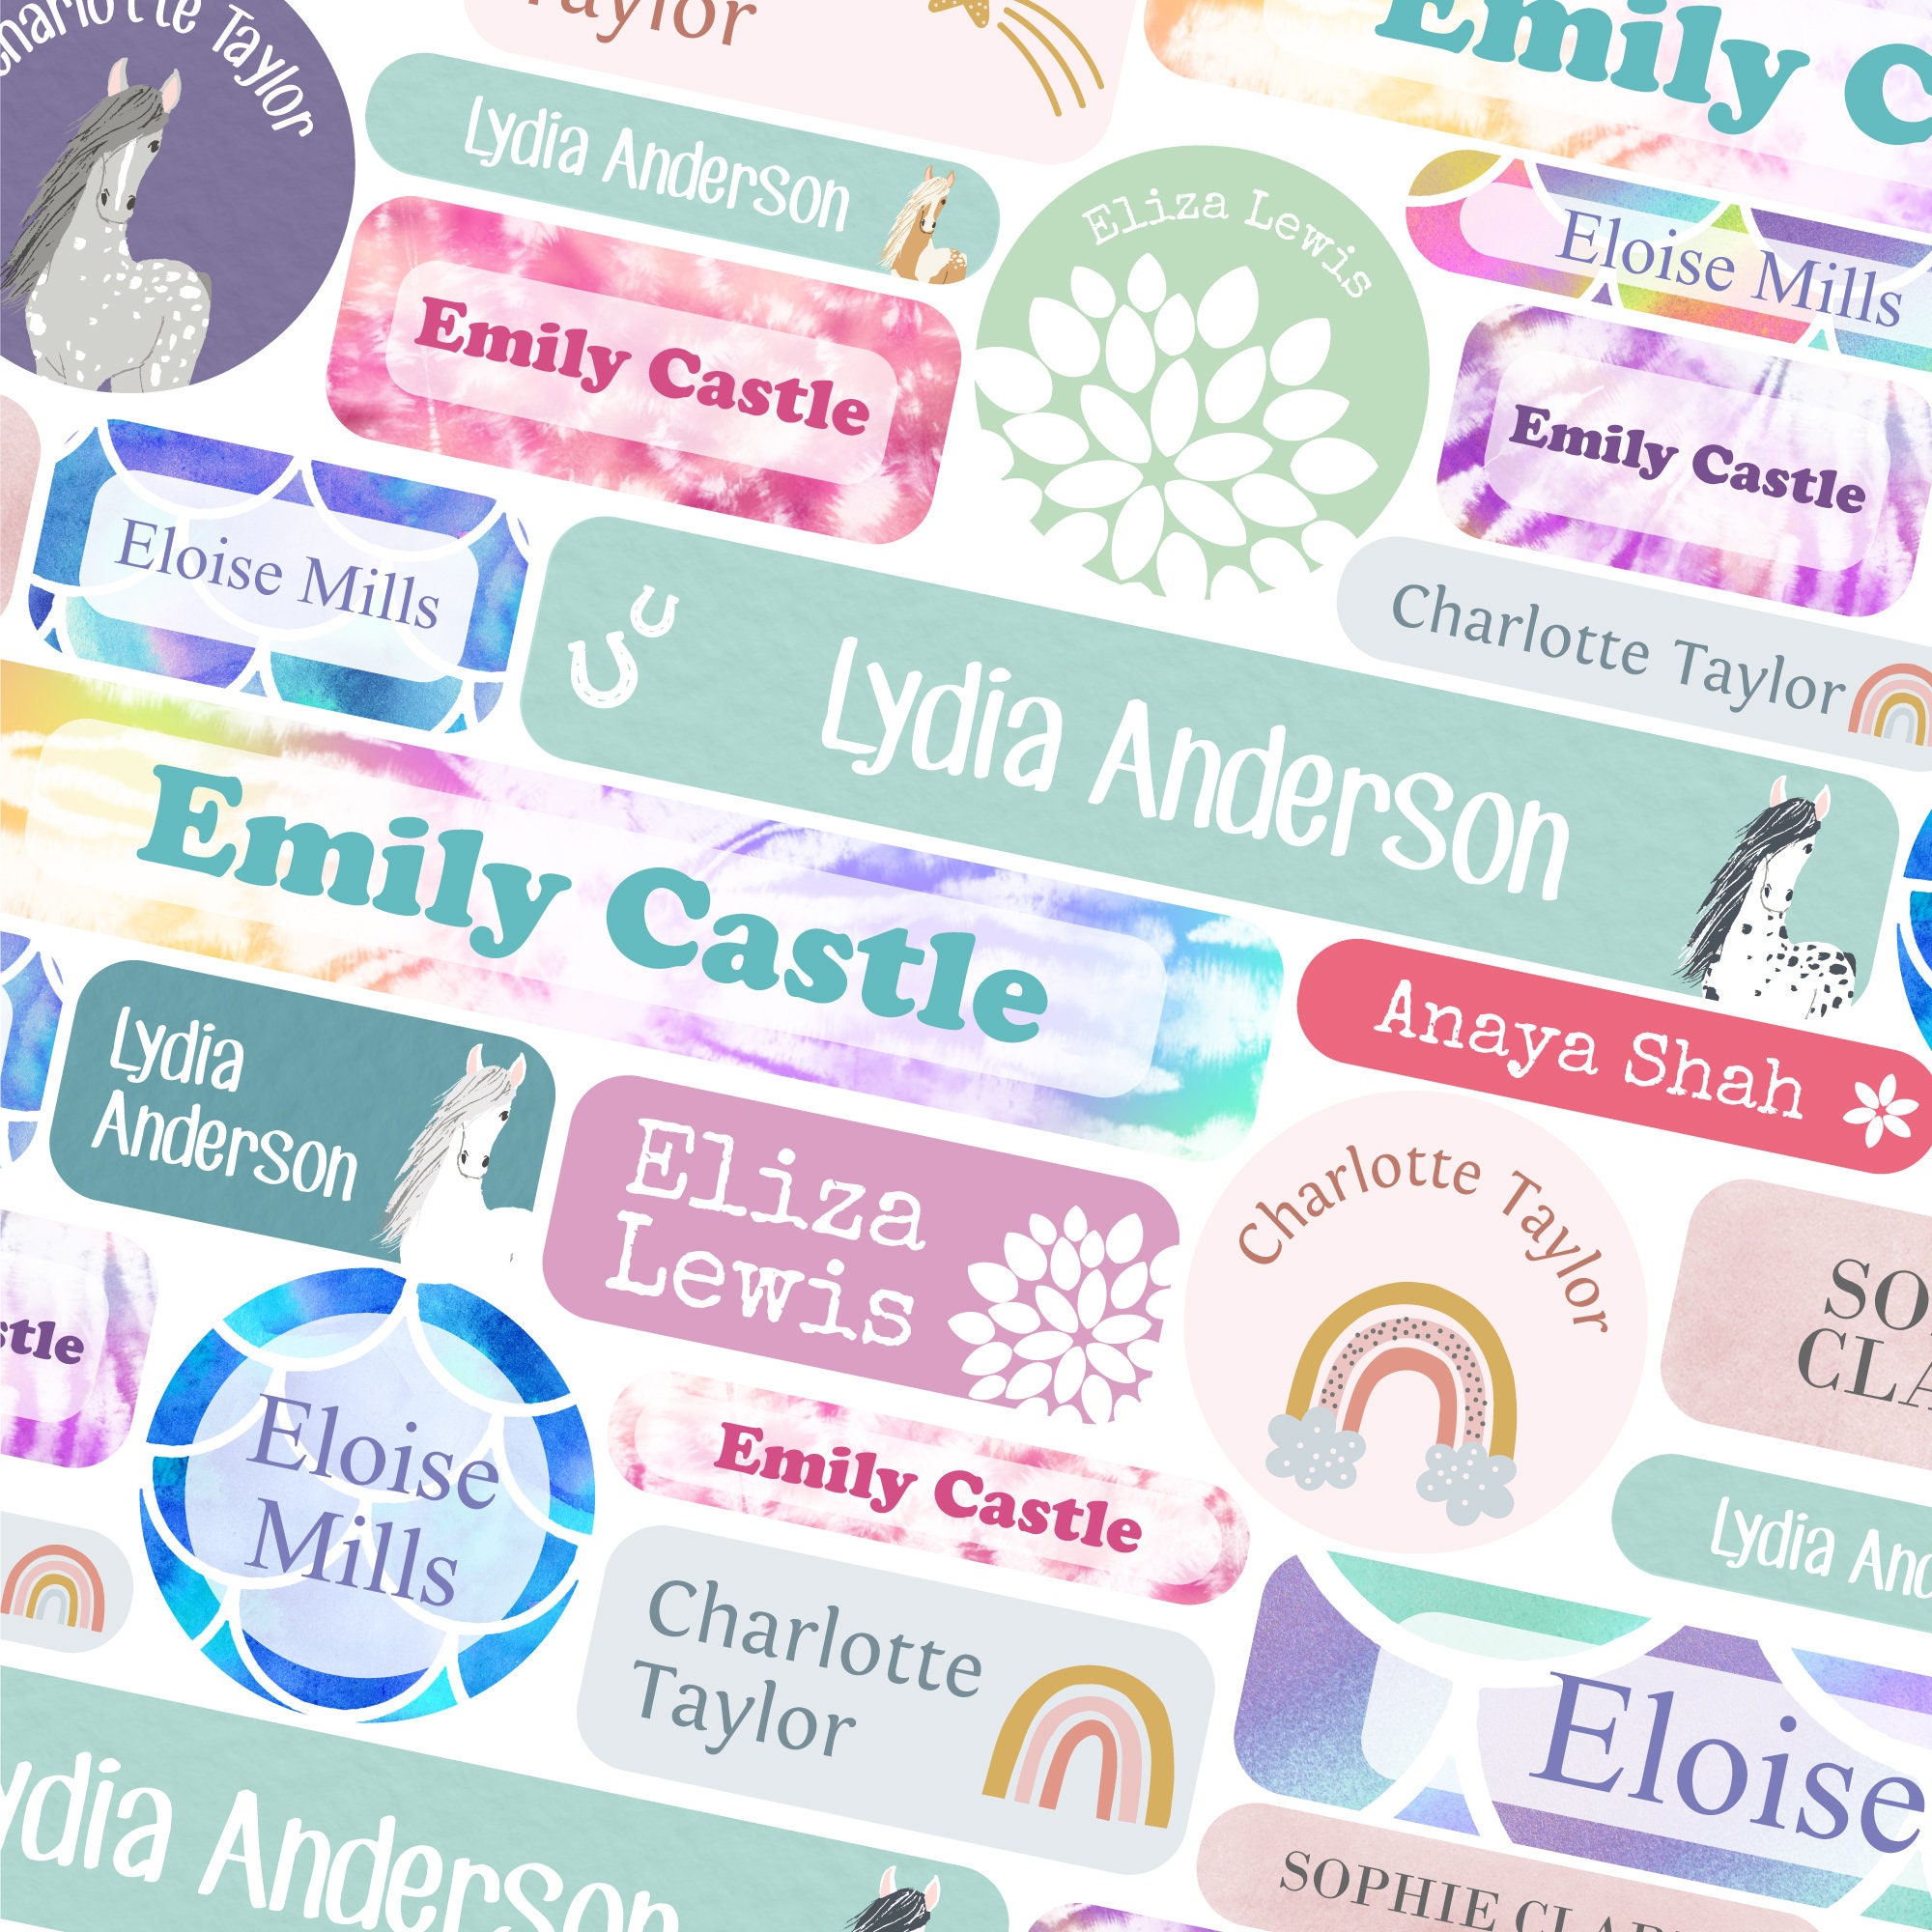  50 Personalized Name Tags for Clothes to Mark Baby and  Children's Clothing. Iron-on Stickers, Resistant to Washing Machine and  Dryer. Size 2.3 x 0.4 inches : Office Products